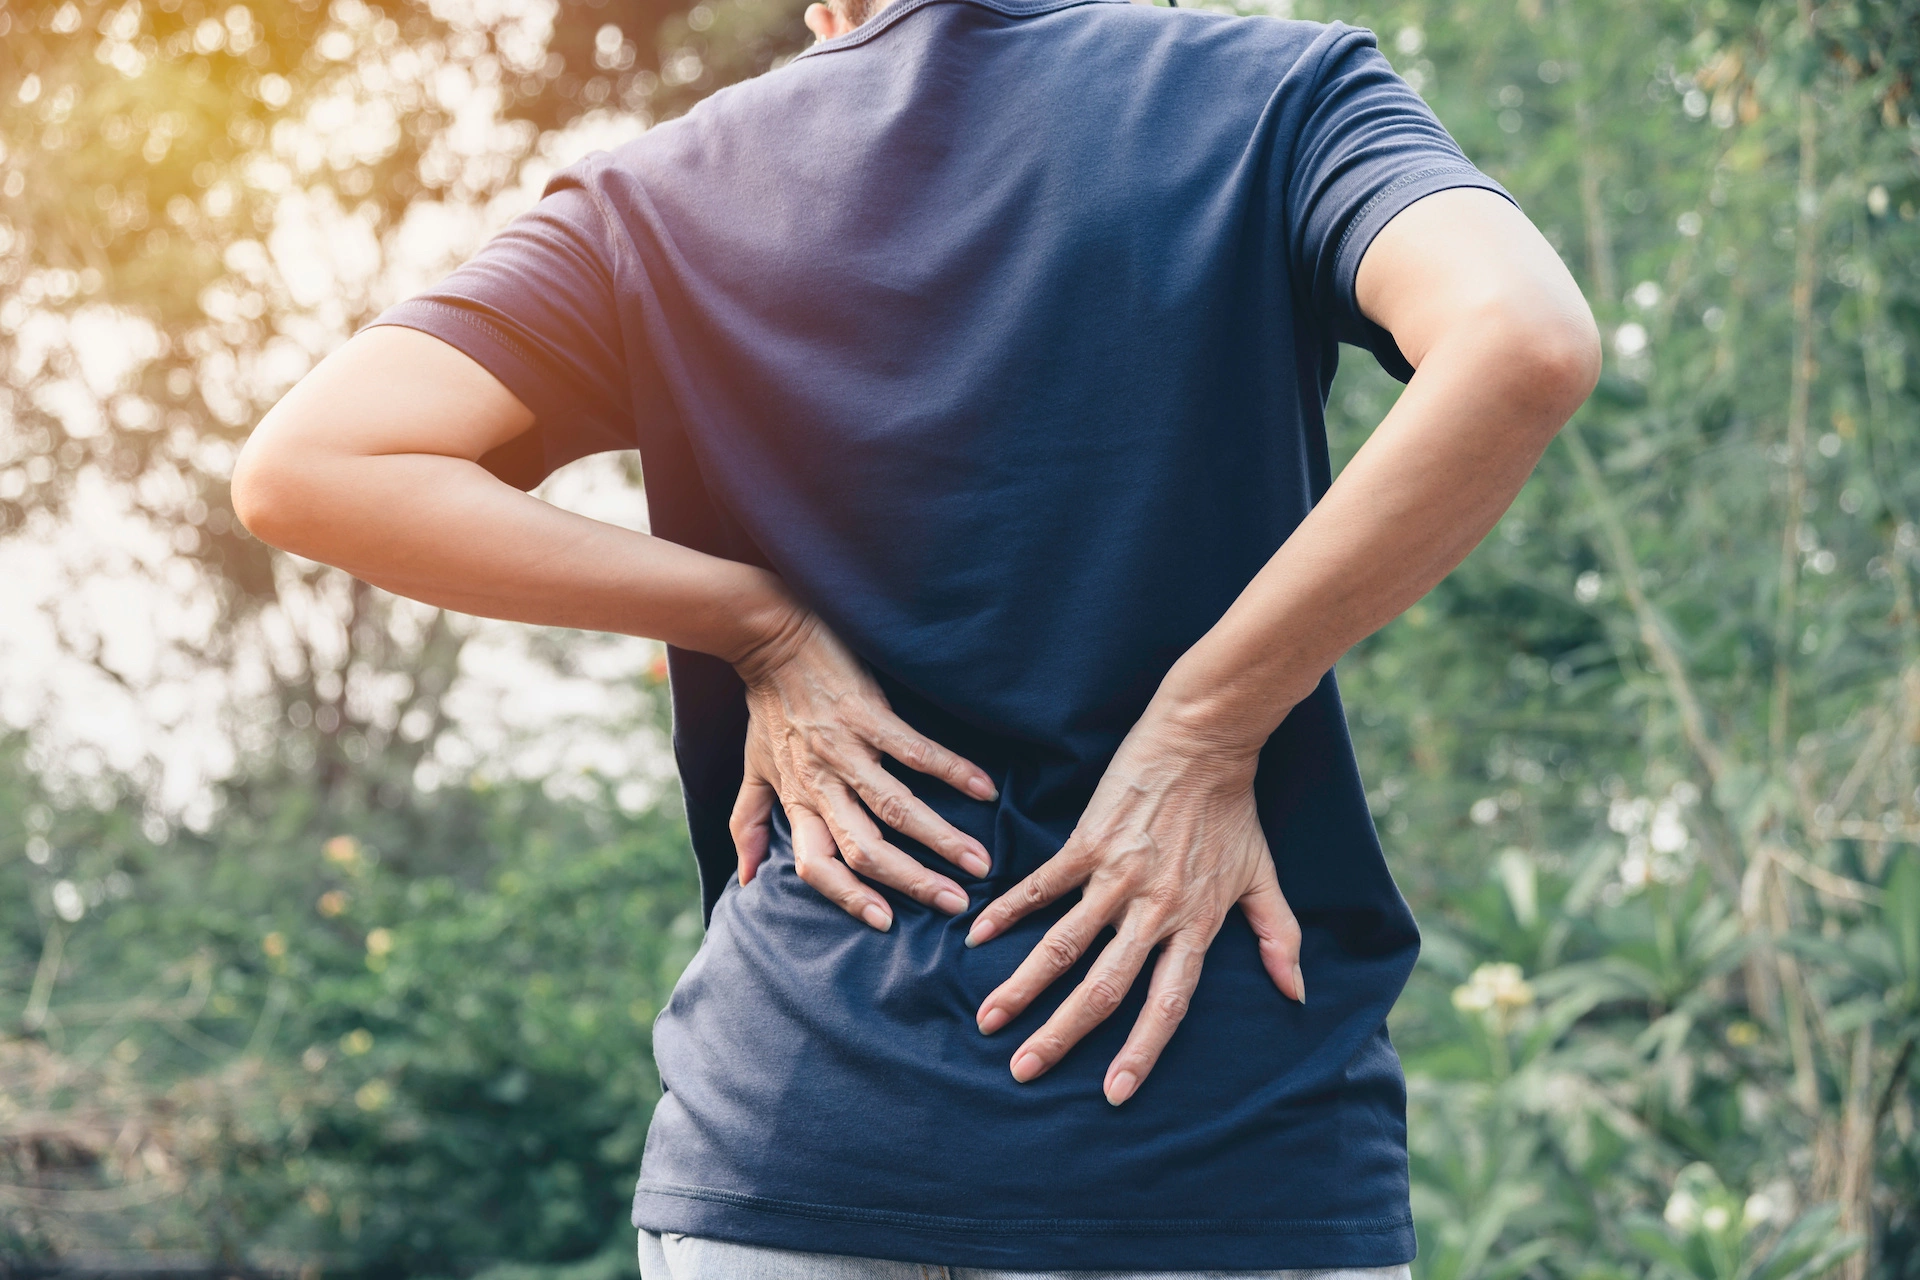 Lower Back Pain: Symptoms, Causes, Treatment, and Stretches